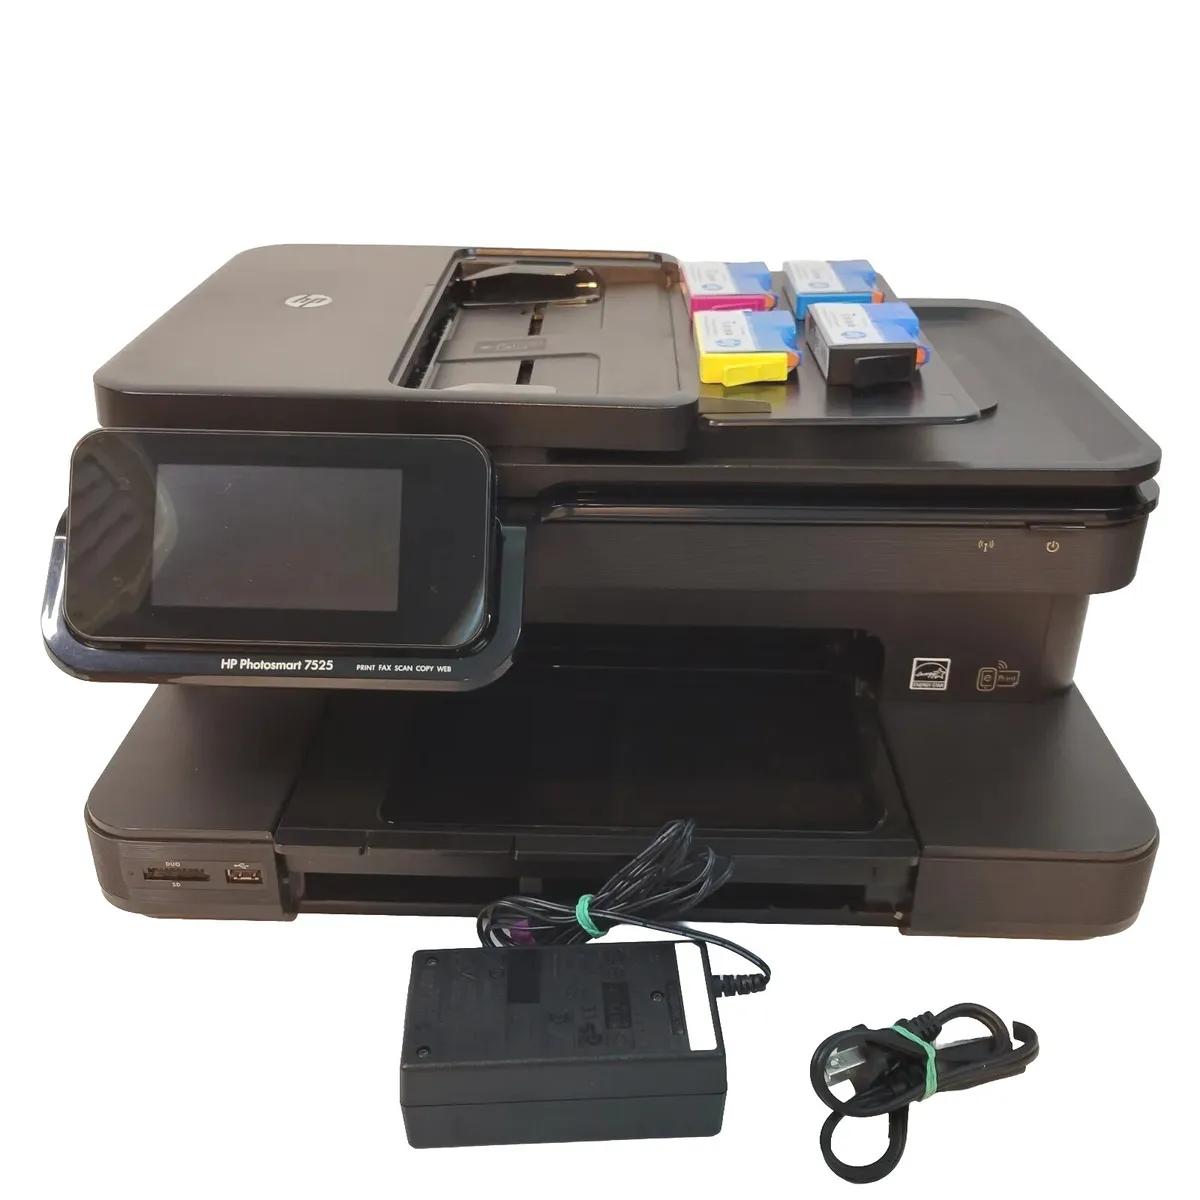 Hp photosmart 7525 printer: complete review & features